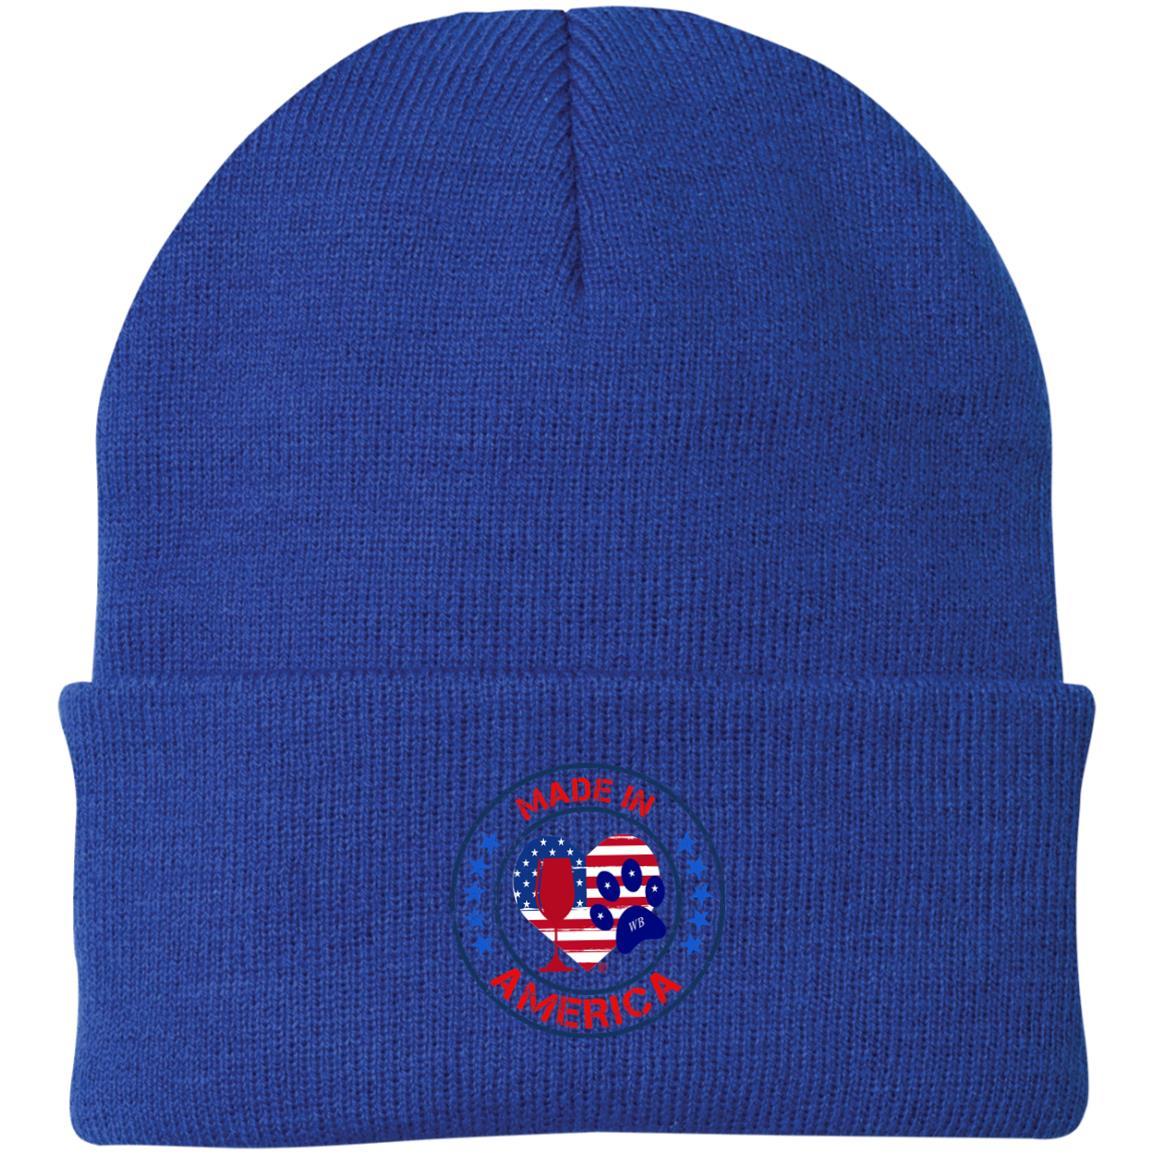 Hats Athletic Royal / One Size Winey Bitches Co "Made In America" Embroidered Knit Cap WineyBitchesCo